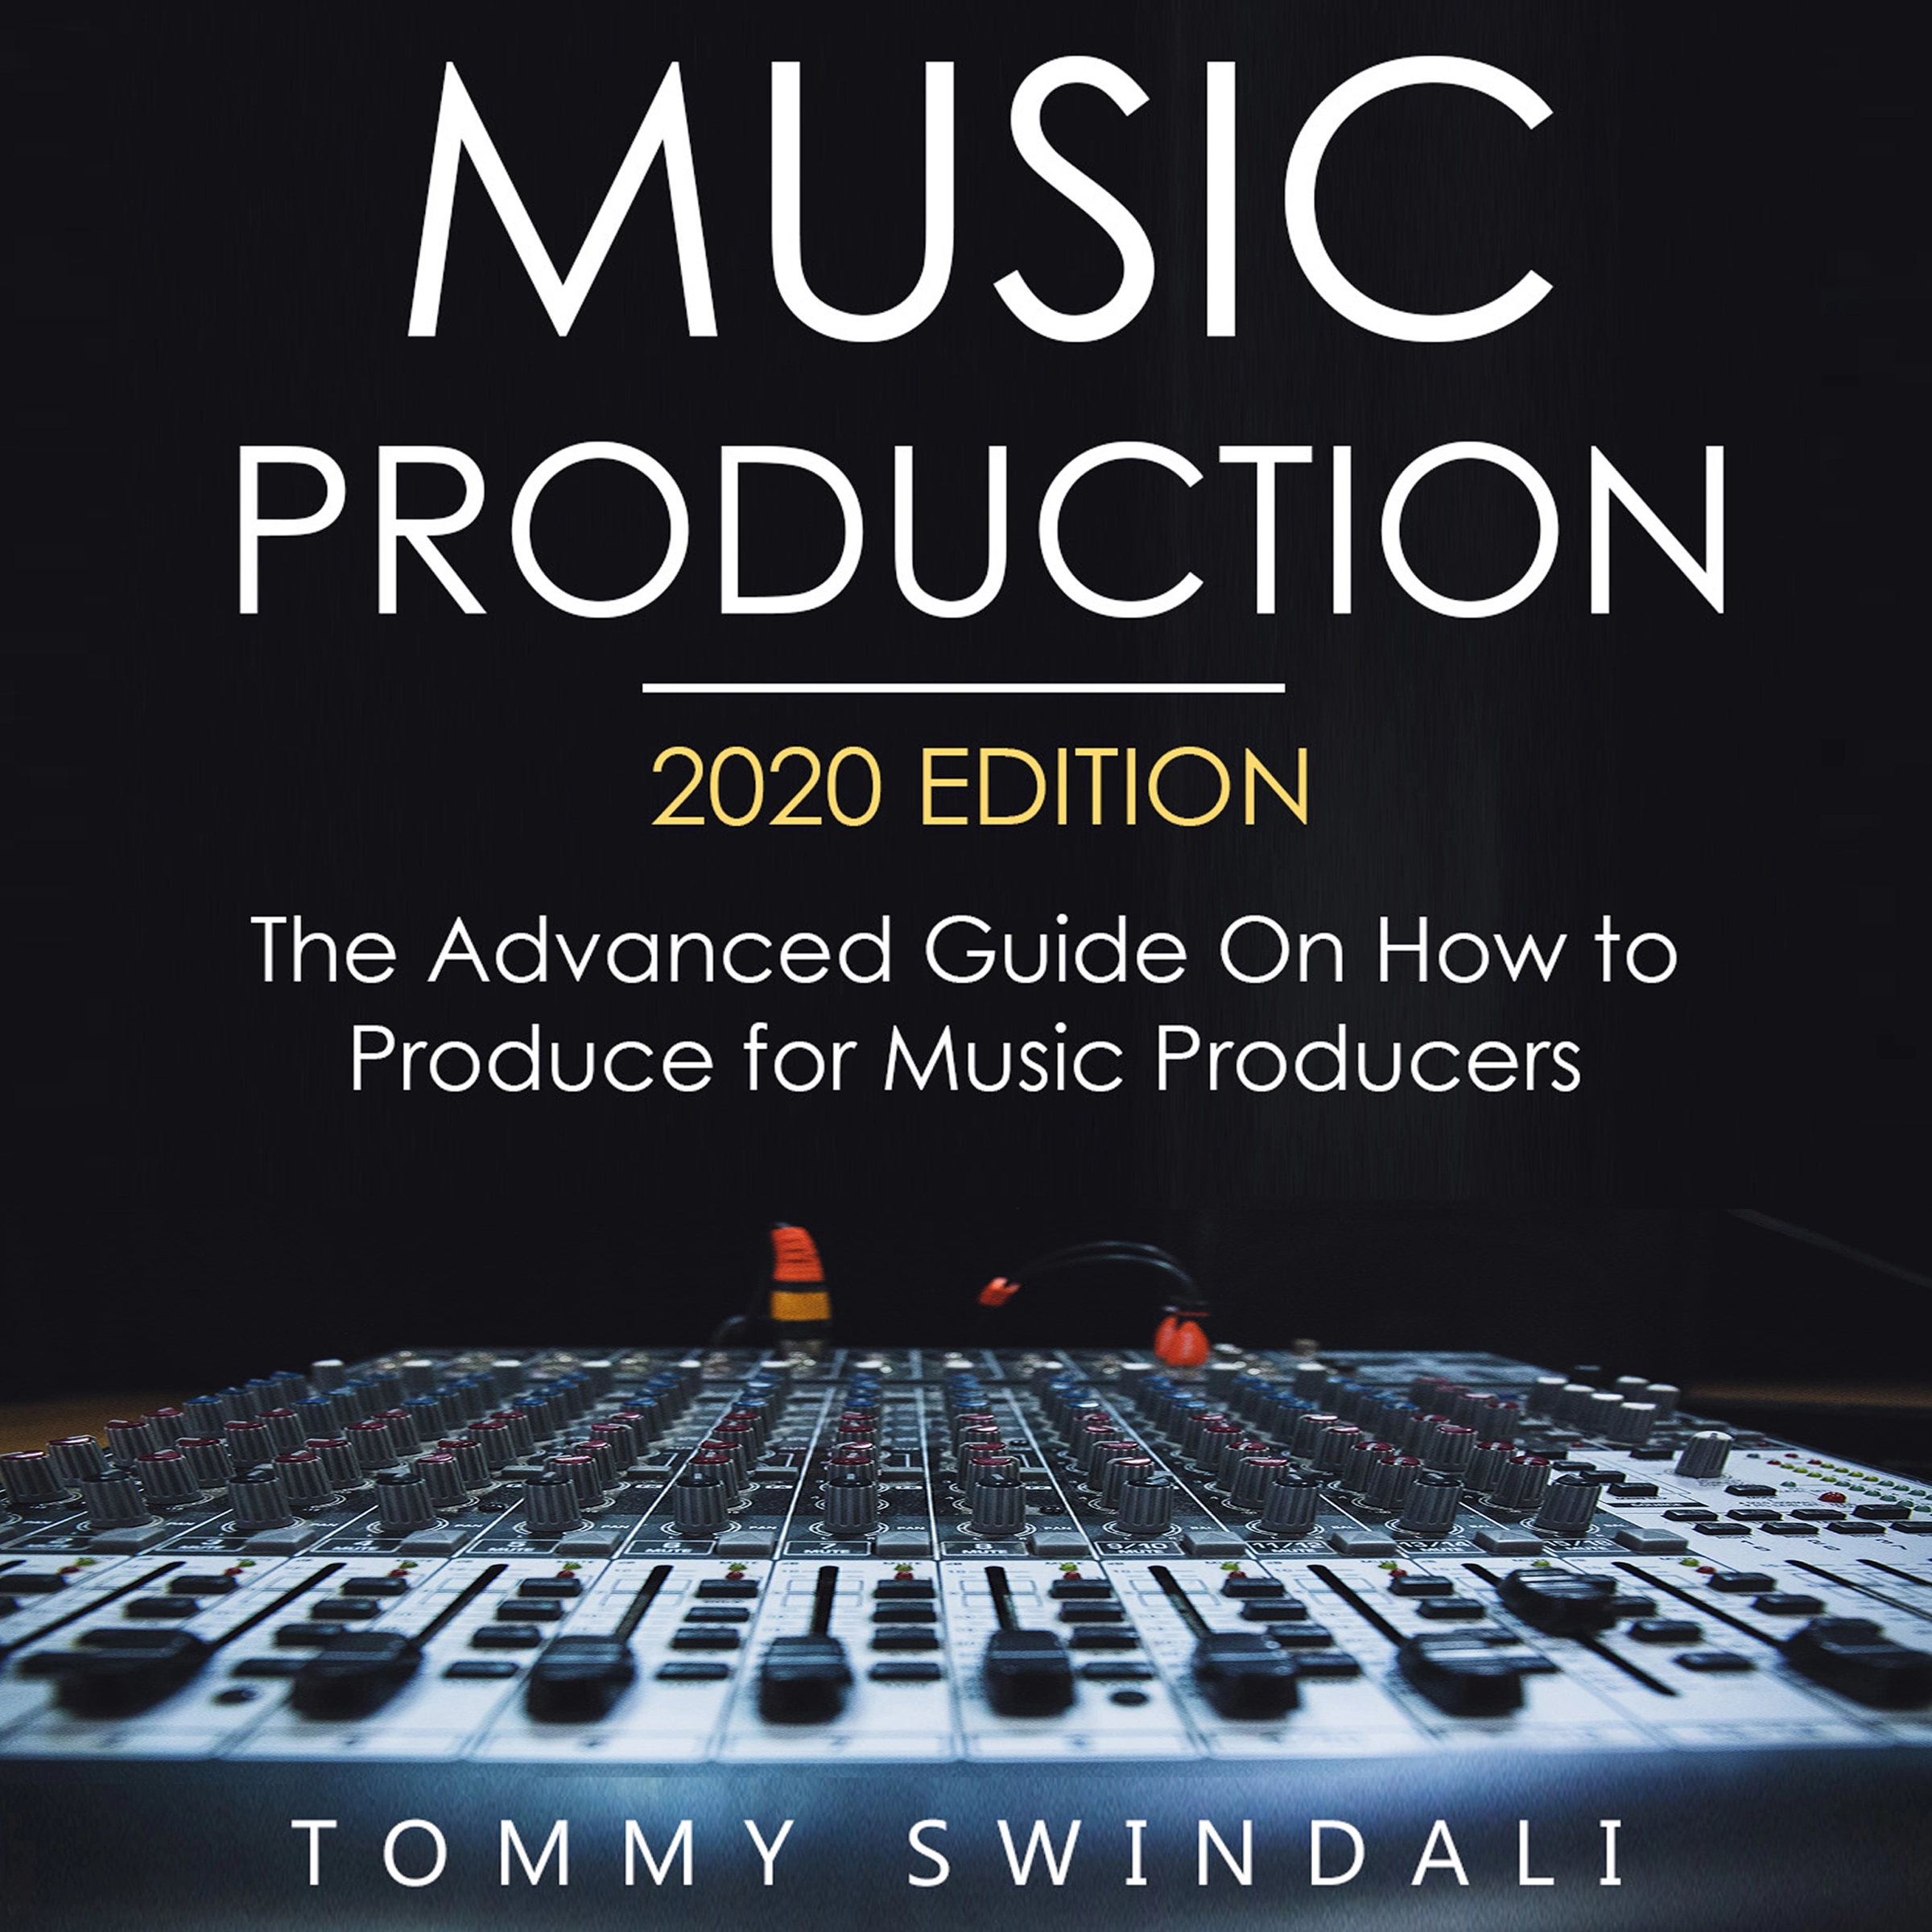 Music Production, 2020 Edition The Advanced Guide on How to Produce for Music Producers Audiobook by Tommy Swindali